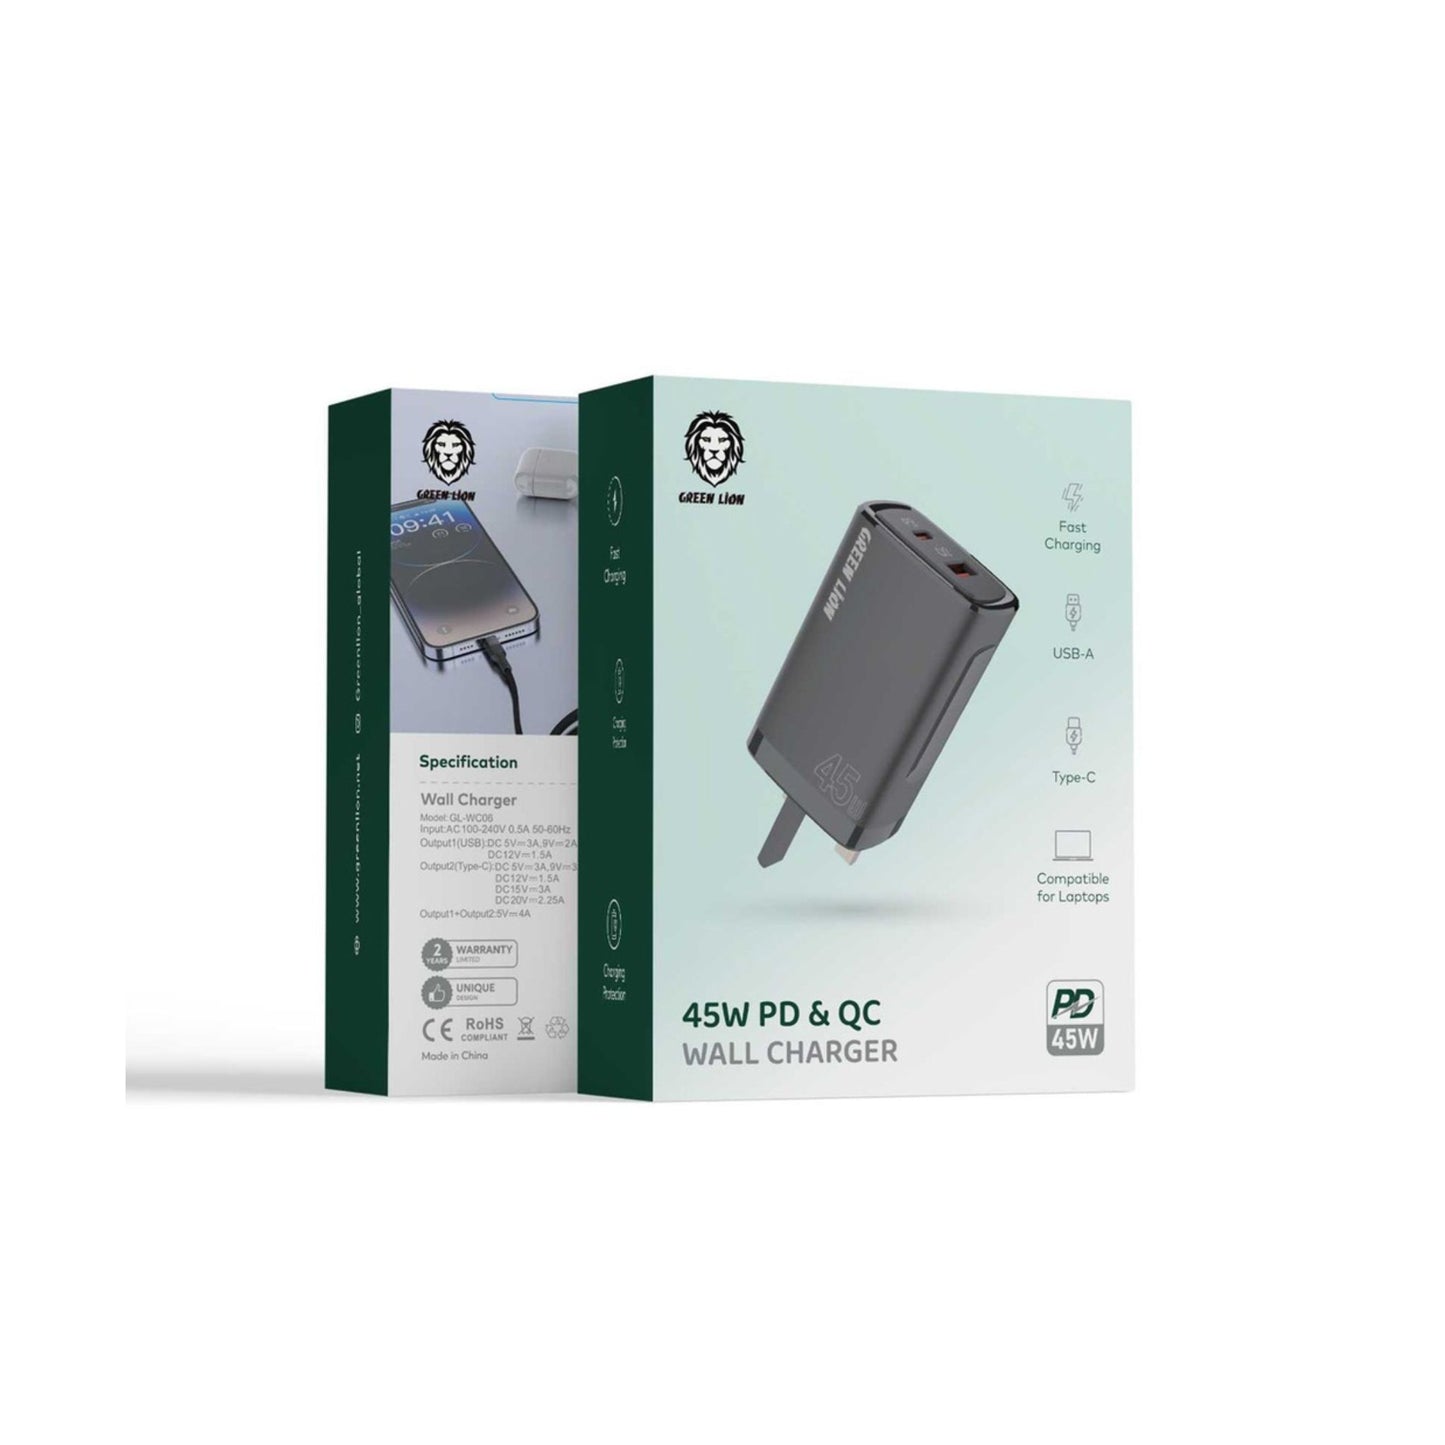 Green Lion 45W PD & QC Wall Charger_Black